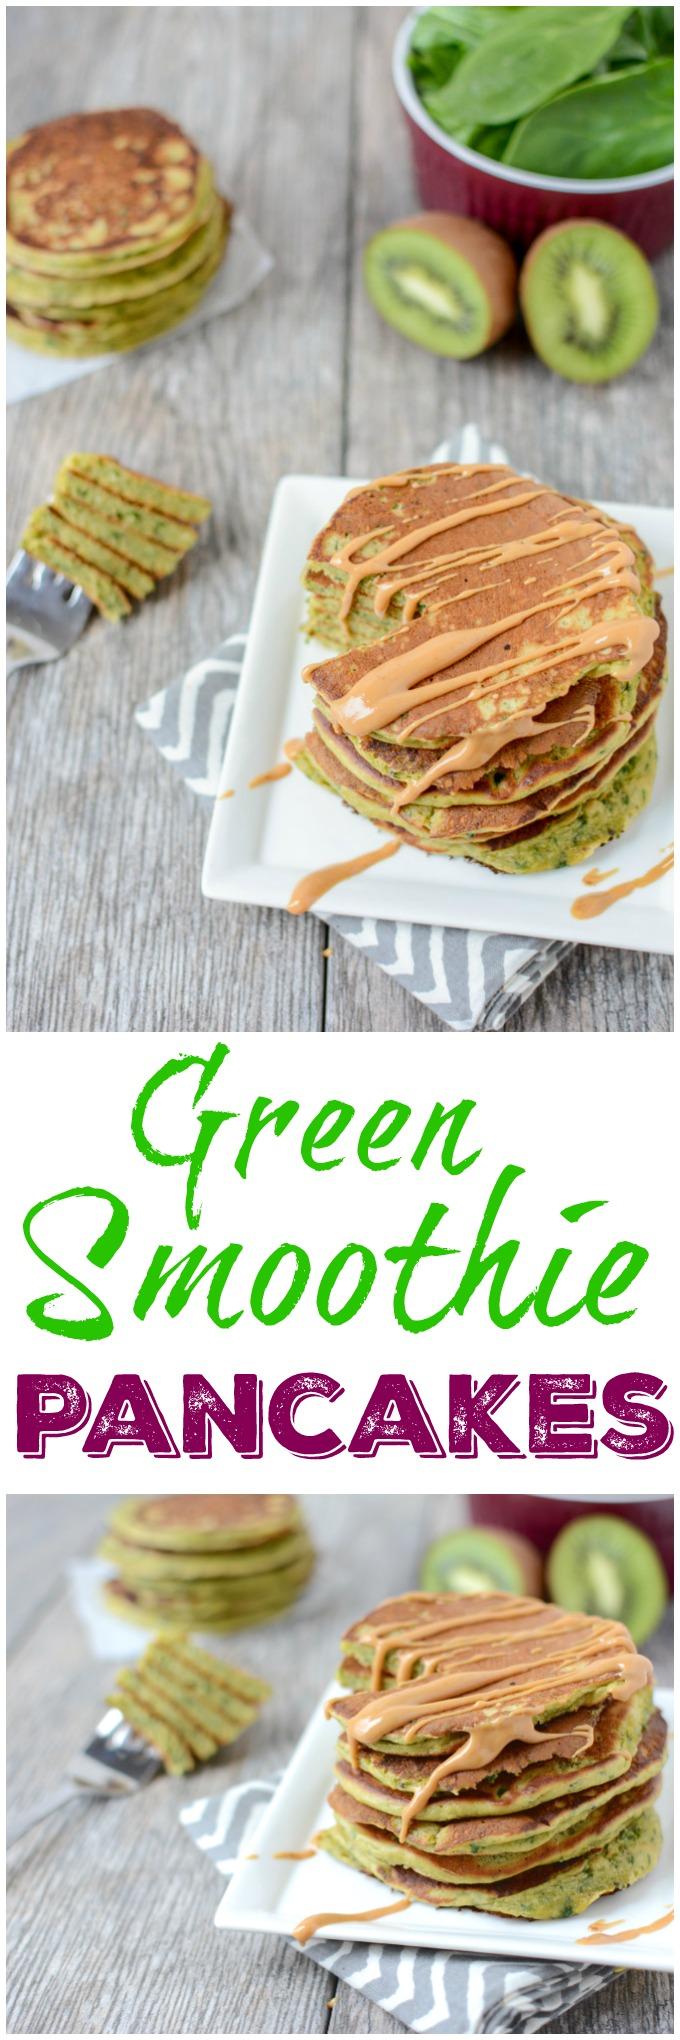 This recipe for Green Smoothie Pancakes has all the healthy ingredients from your favorite smoothie in pancake form so you can prep them ahead of time and reheating for breakfast during the week!